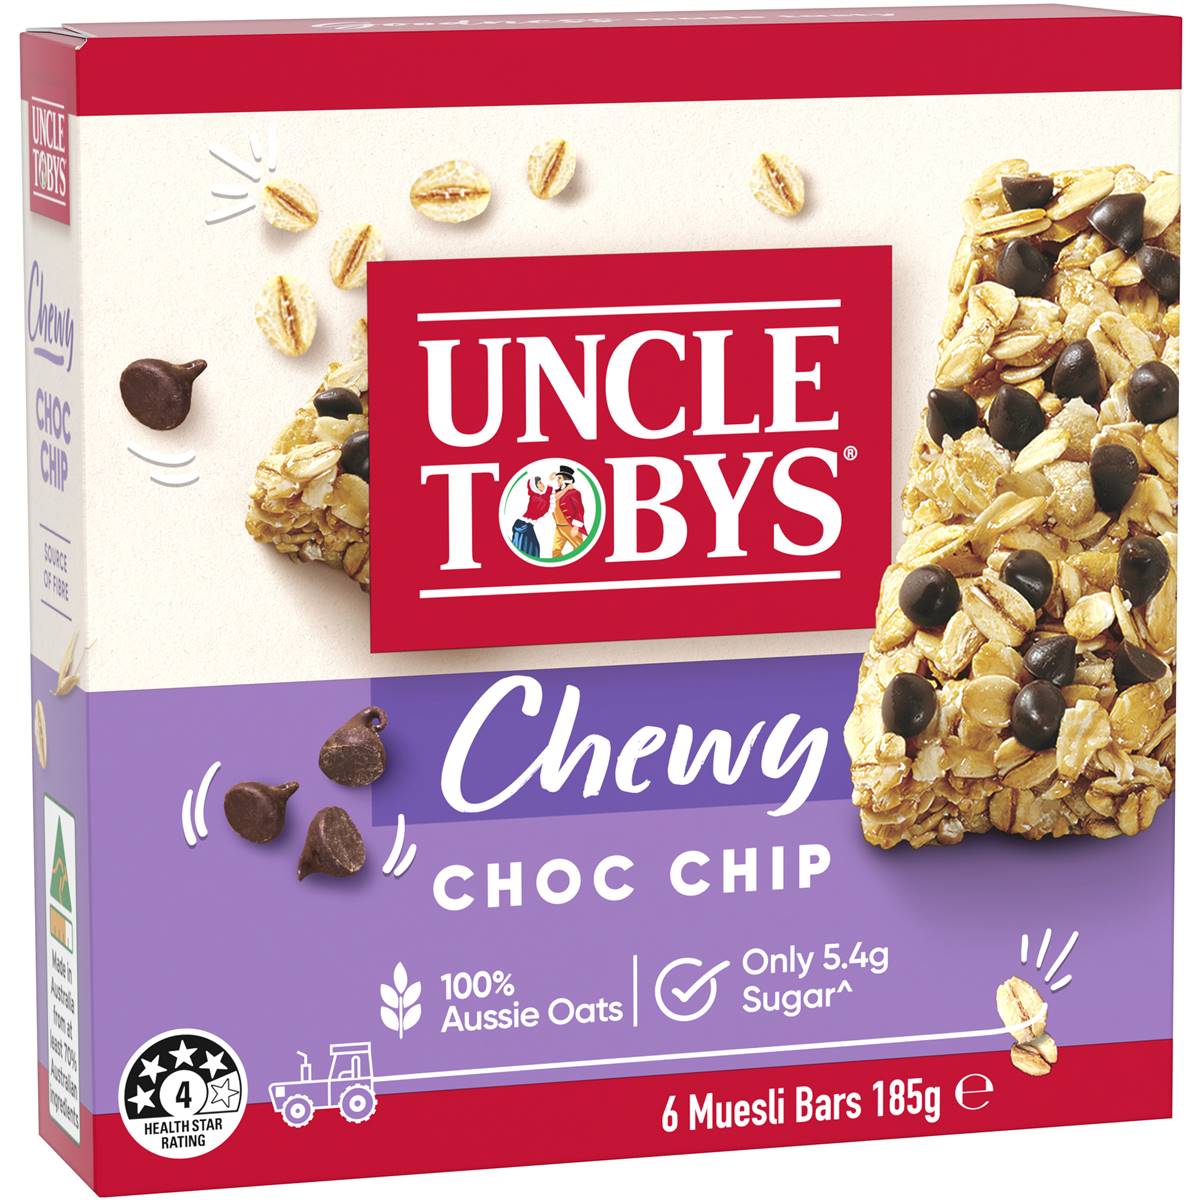 Calories in Uncle Tobys Muesli Bars Chewy Choc Chip